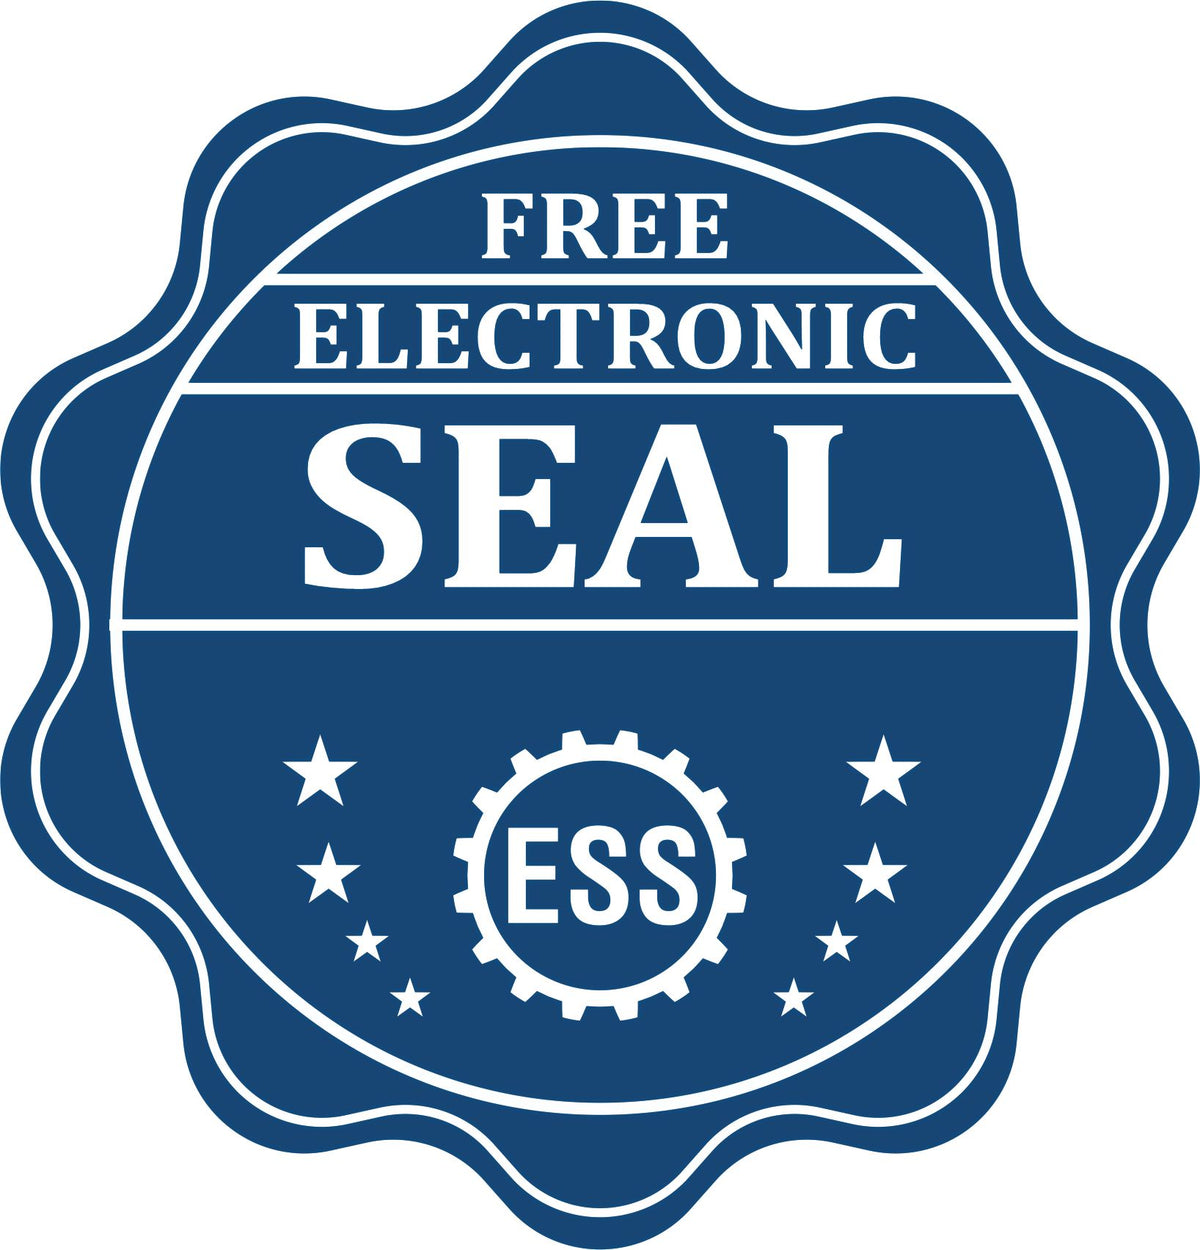 A badge showing a free electronic seal for the Handheld Kansas Land Surveyor Seal with stars and the ESS gear on the emblem.